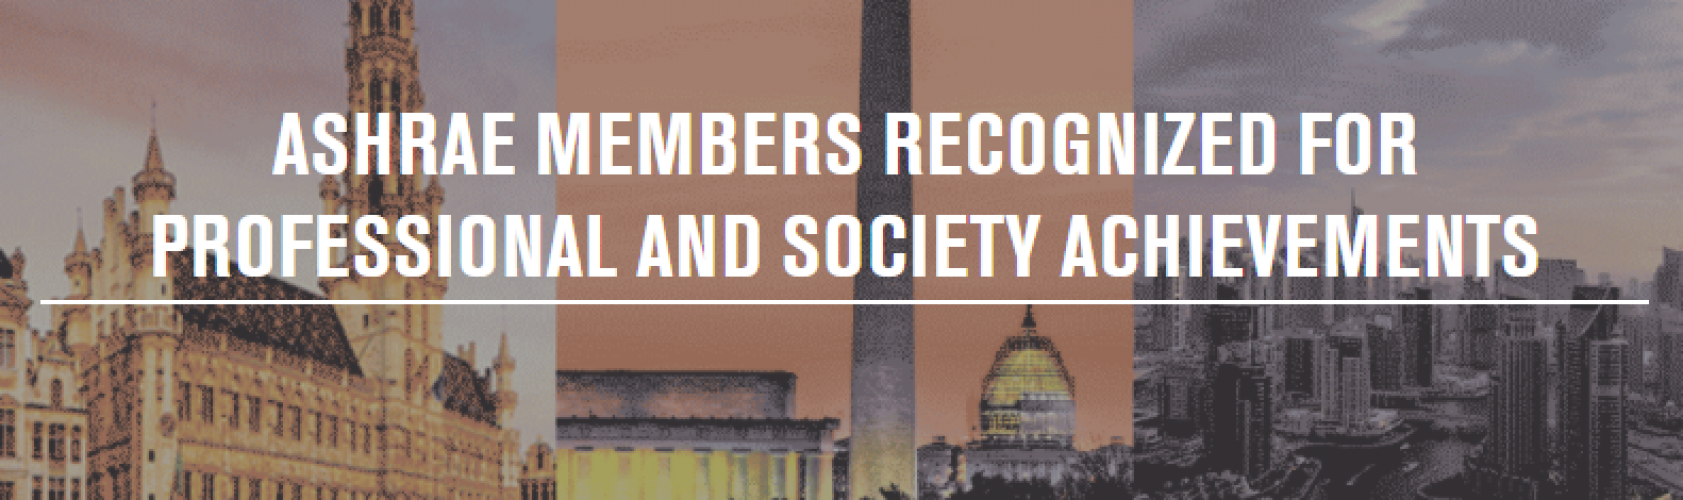 ashrae-members-recognized-for-professional-and-society-achievements